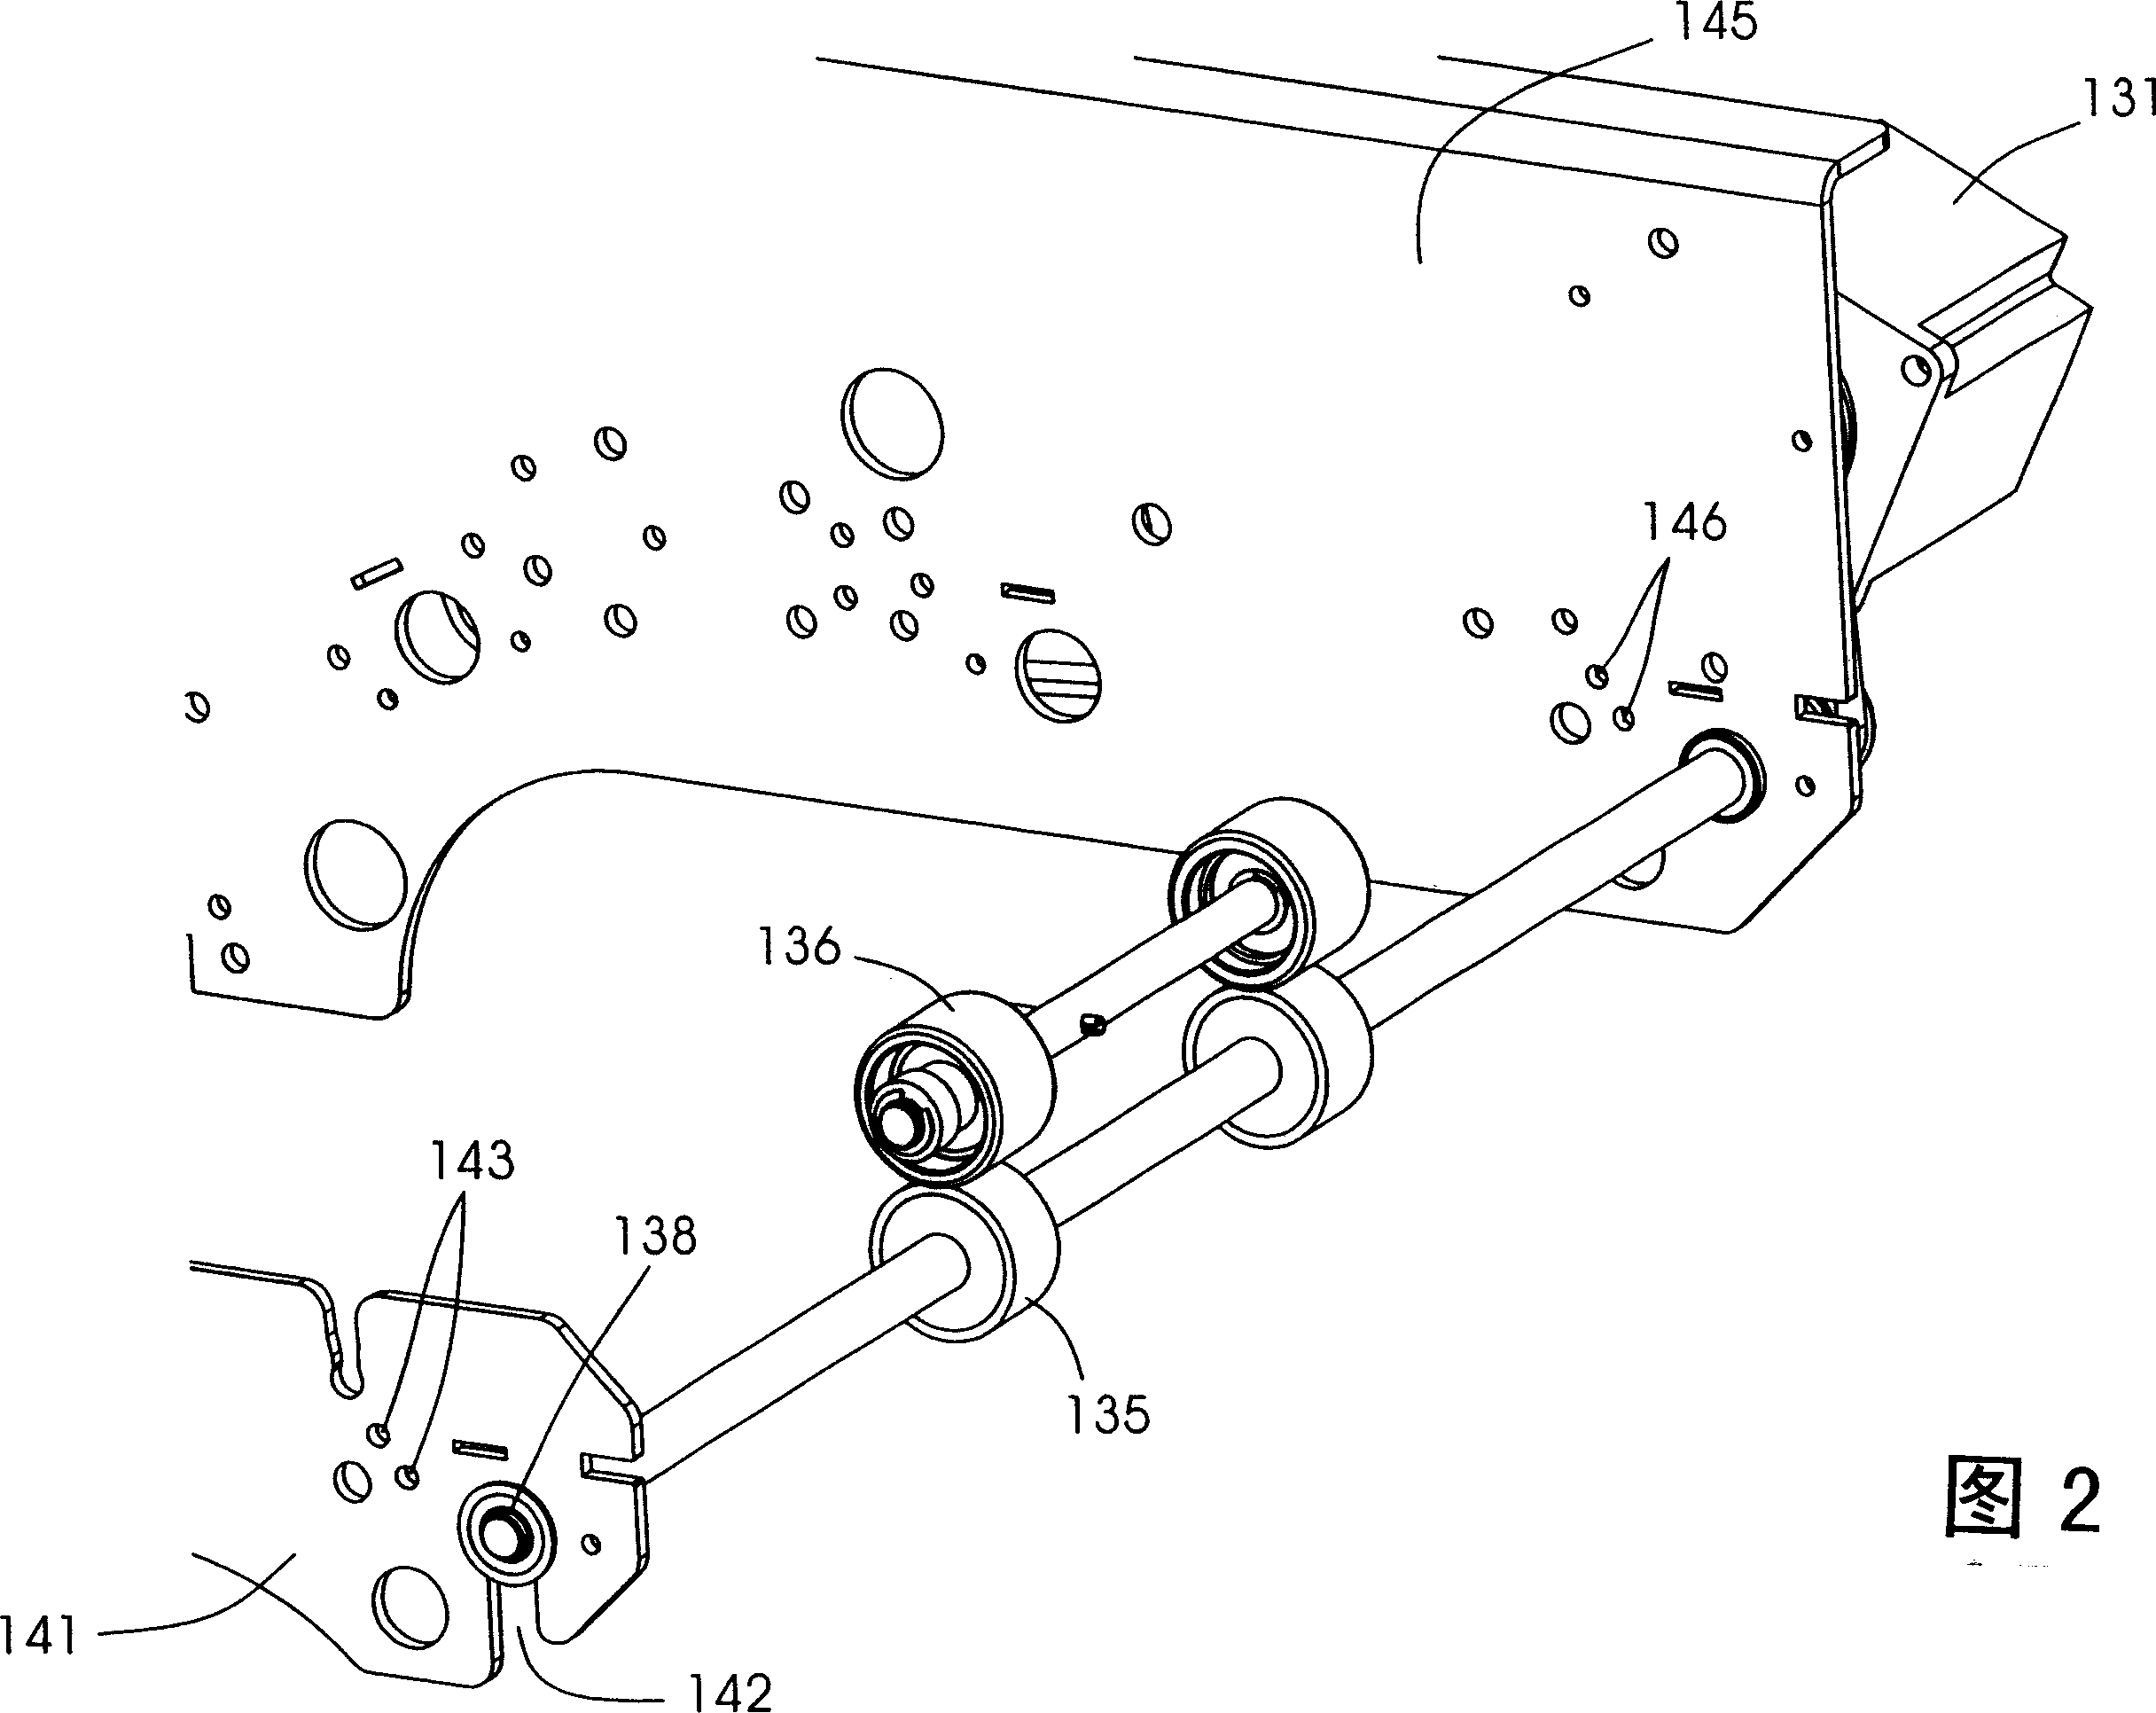 Device used for delivering quiding plane material